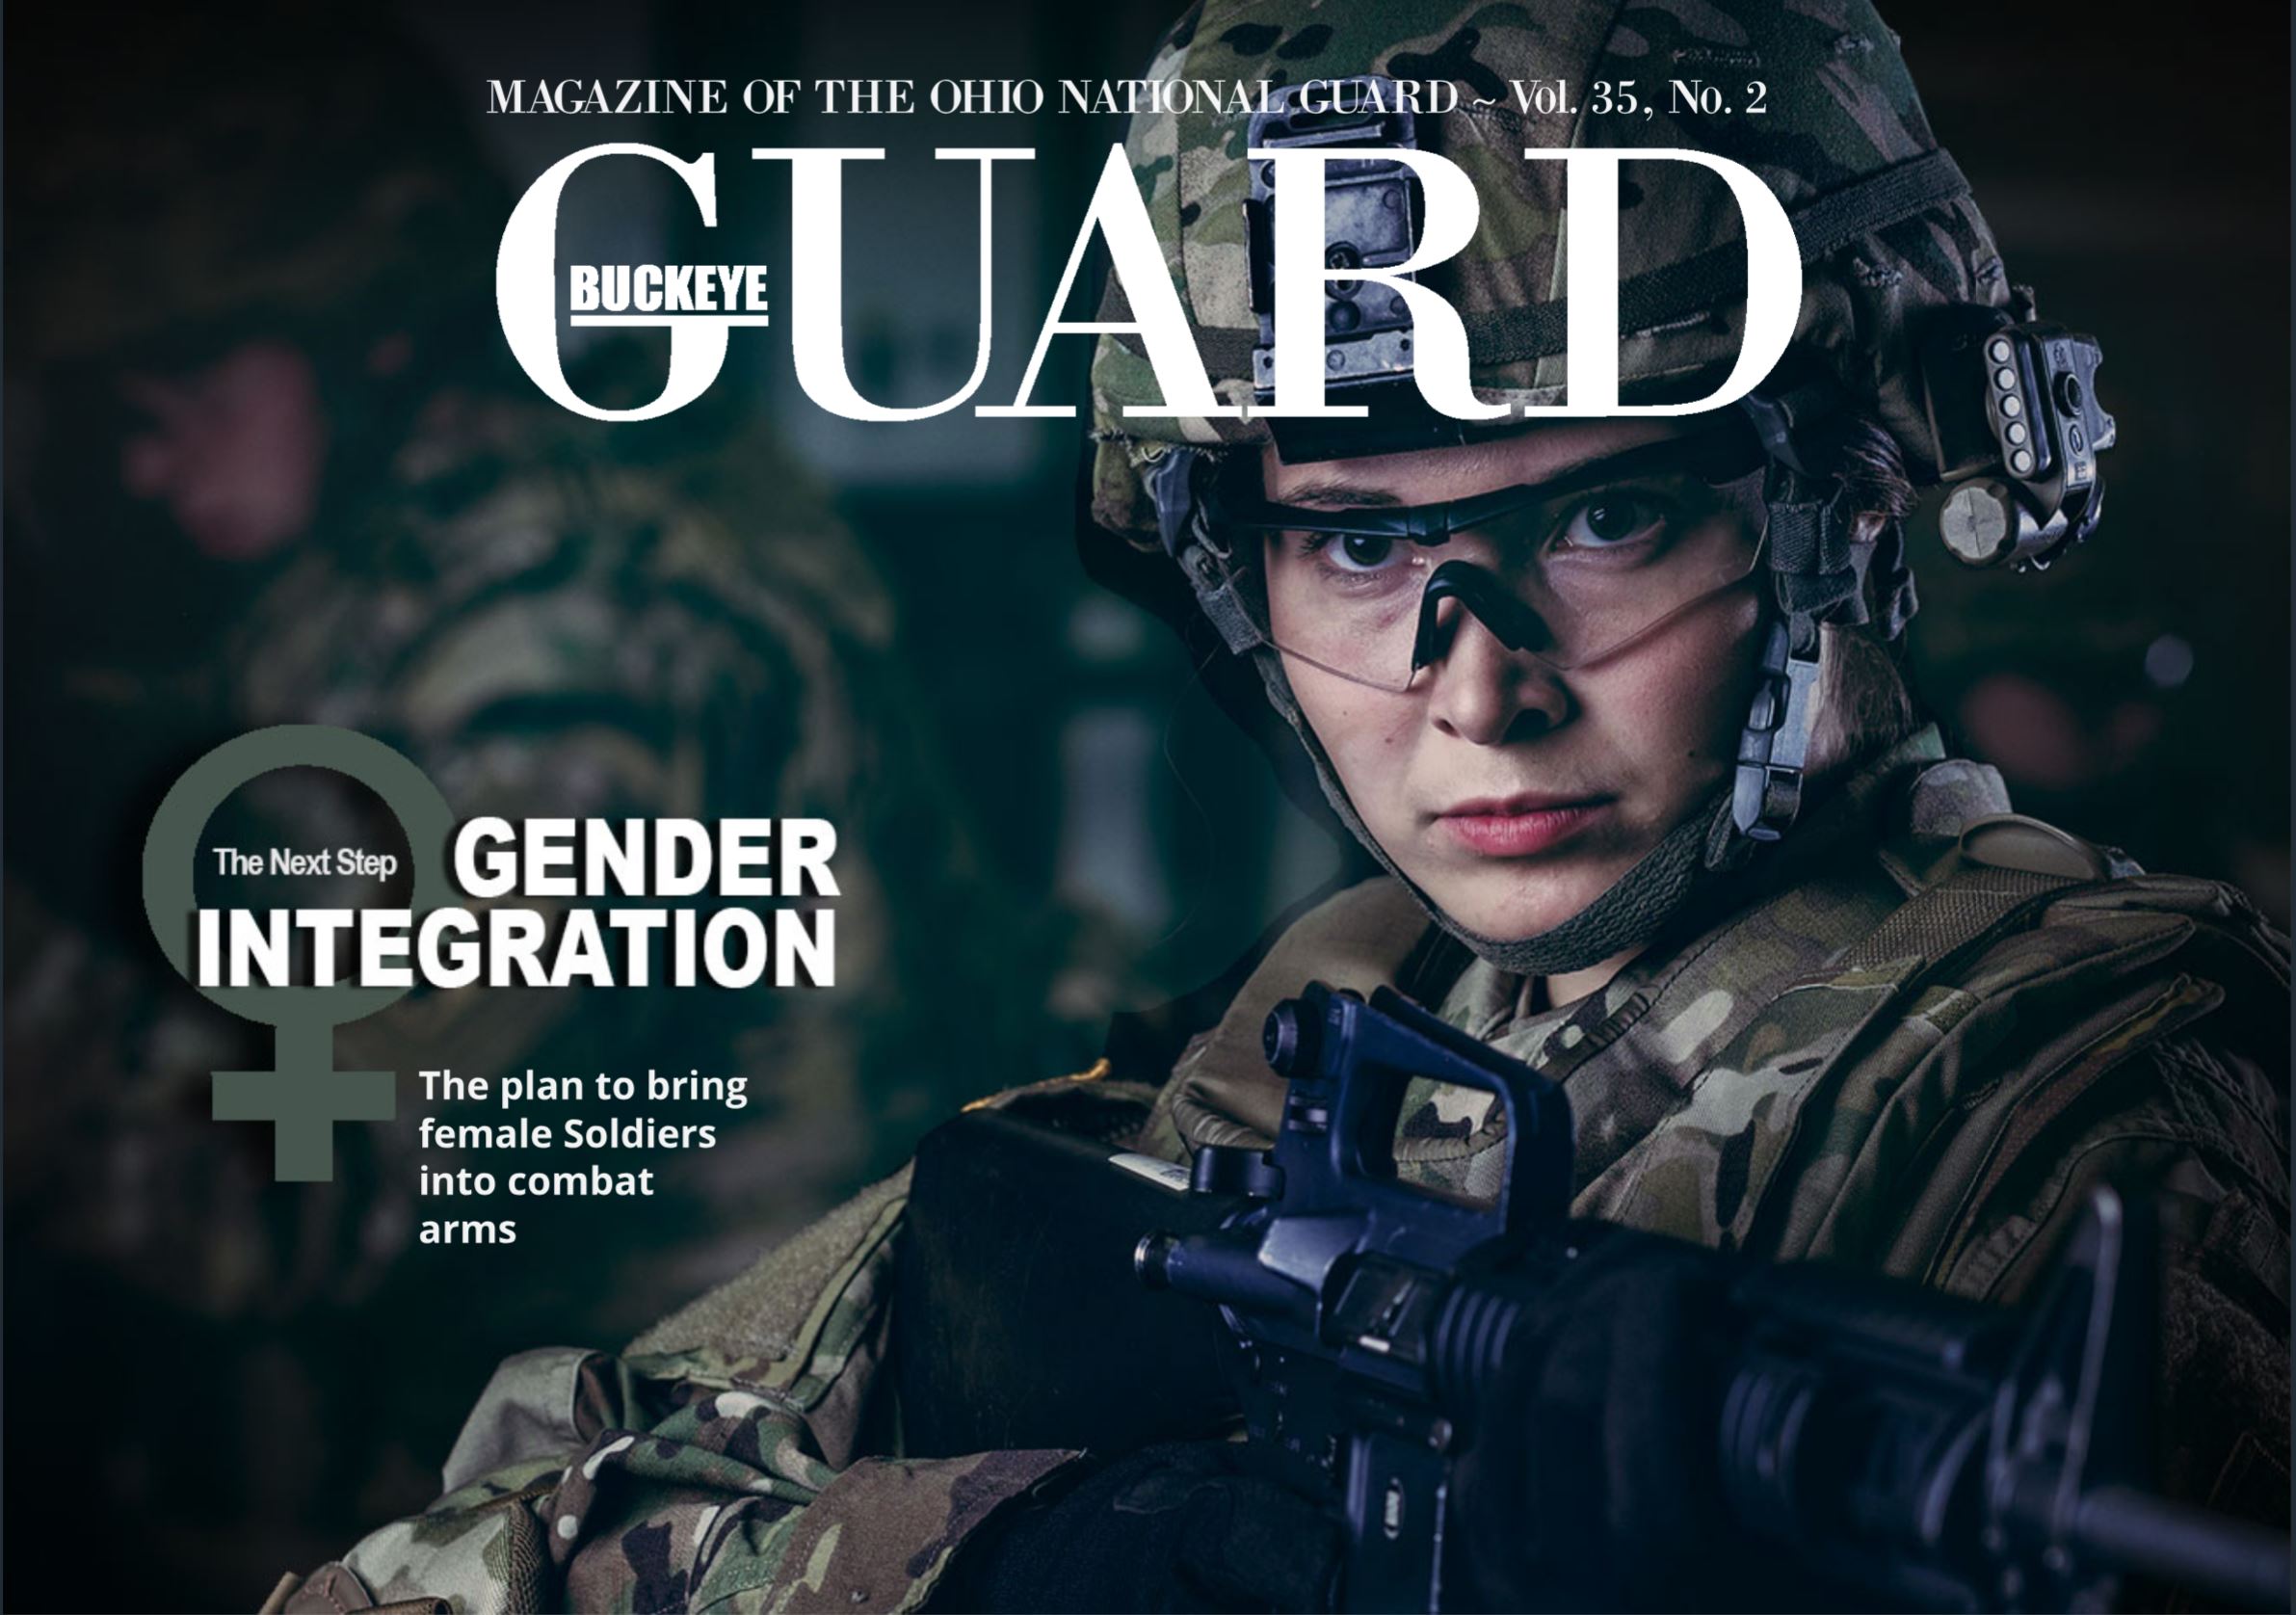 Cover of Buckeye Guard: March/April 2017